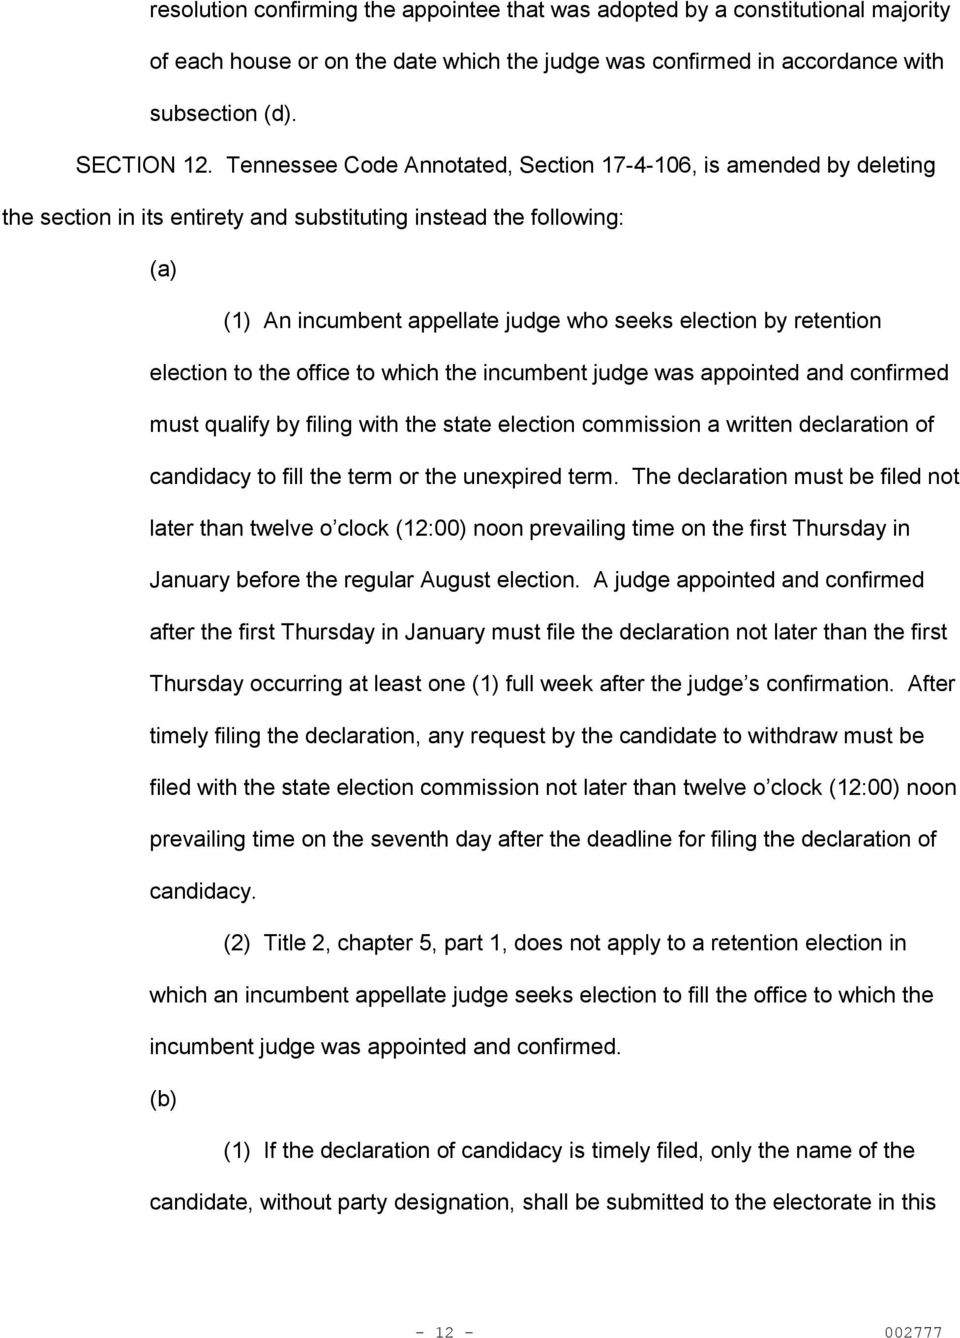 retention election to the office to which the incumbent judge was appointed and confirmed must qualify by filing with the state election commission a written declaration of candidacy to fill the term